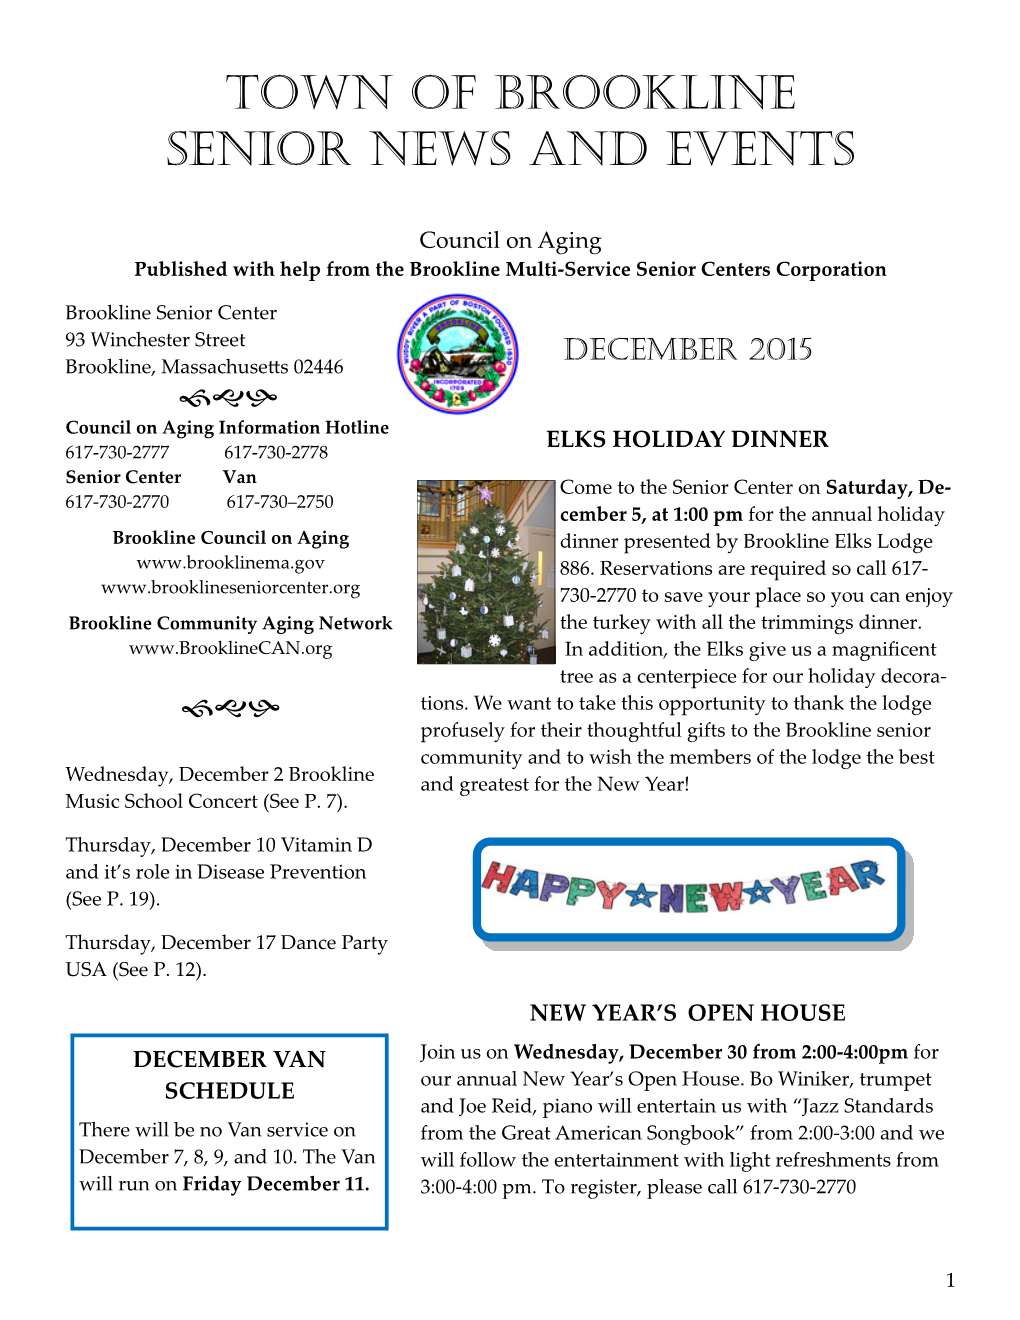 Council on Aging Newsletter December 2015